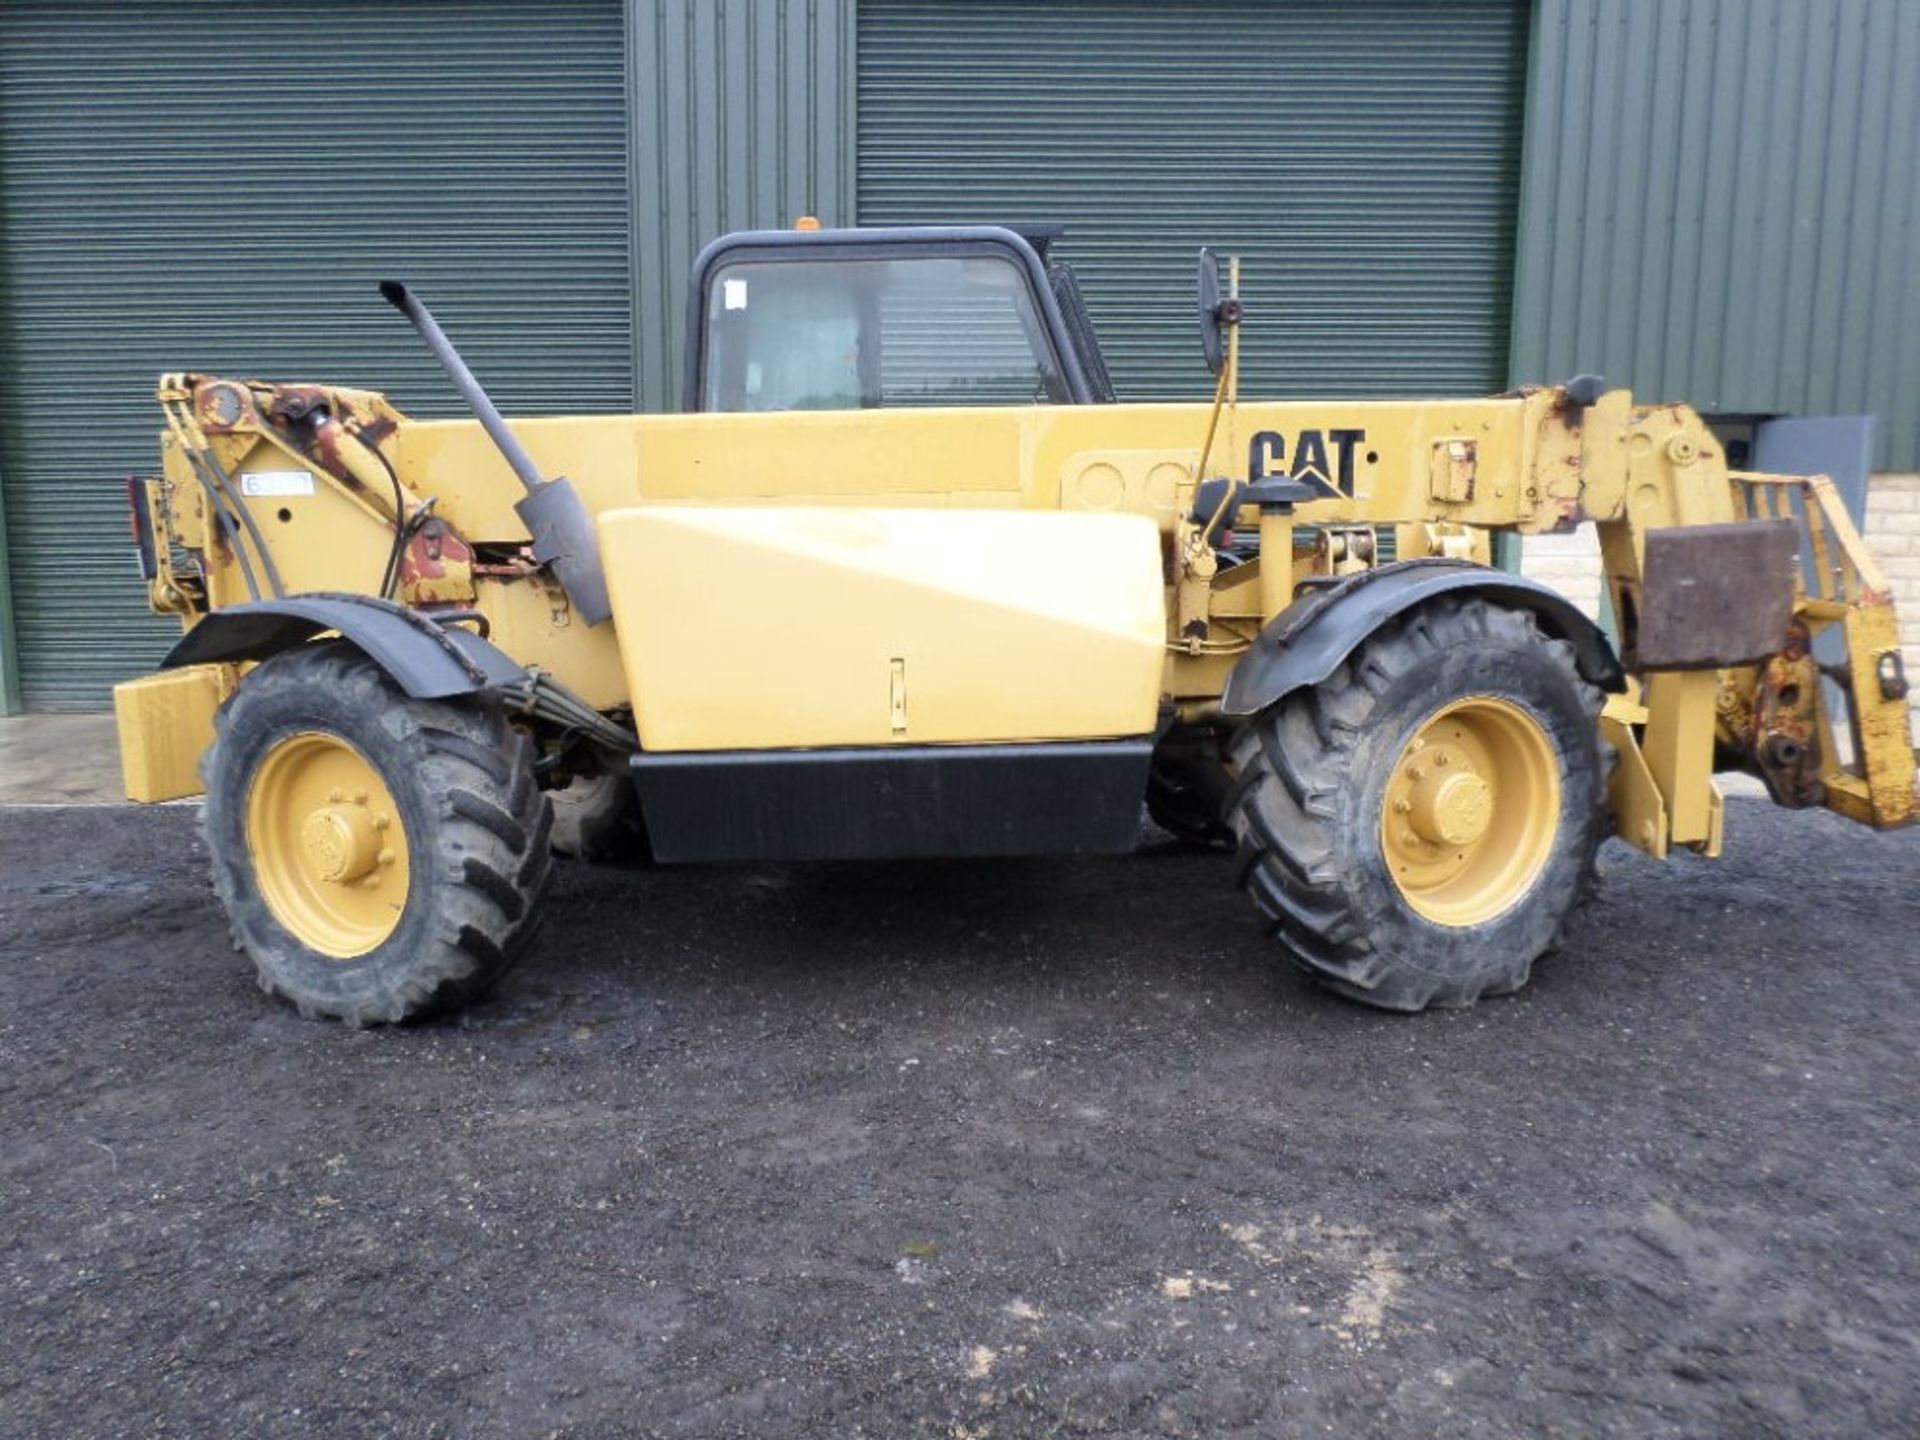 1999 CAT TH63 TELEPORTER (LOCATION SHEFFIELD) 5612 HOURS (RING FOR COLLECTION DETAILS) [+ VAT] - Image 11 of 13